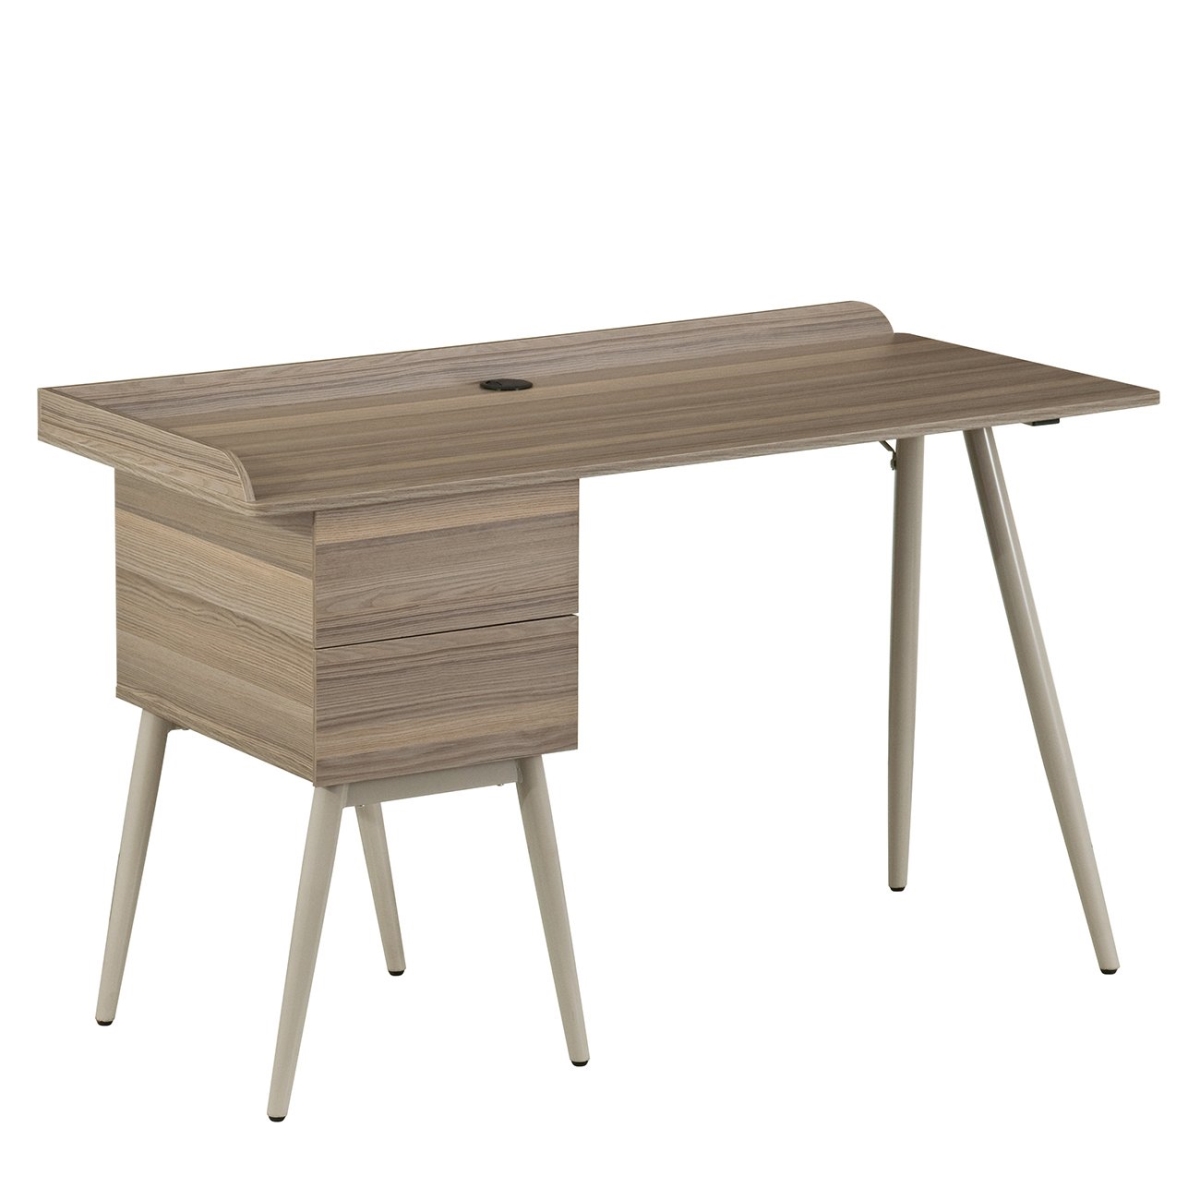 Rta-2338-nat Modern Desk With Drawers, Natural